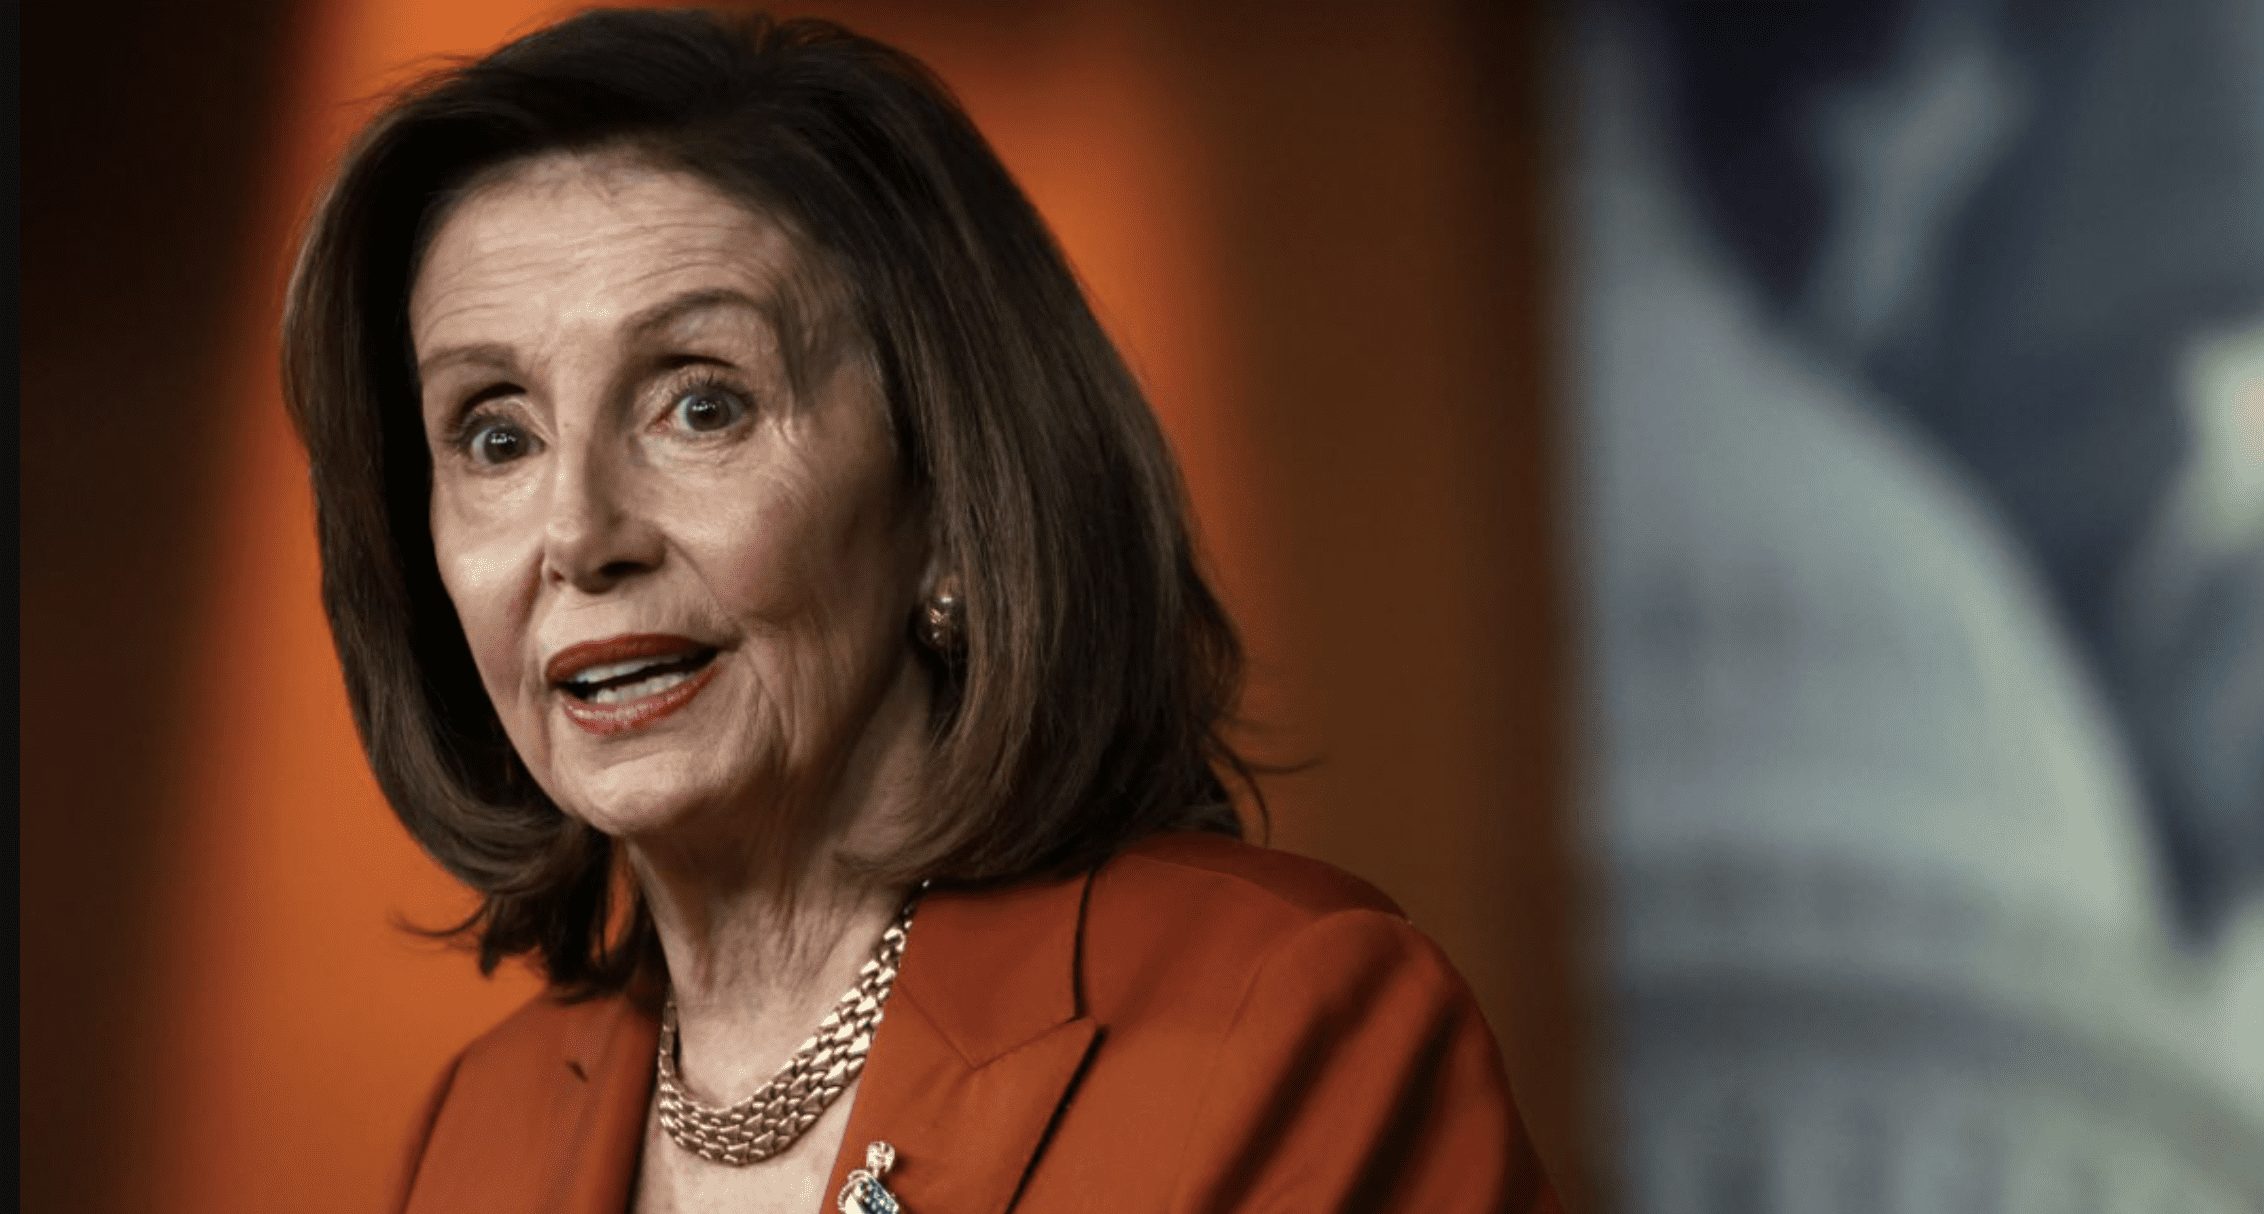 A spokeswoman for the foreign ministry said that China more forcefully warned the U.S. about Nancy Pelosi's possible trip to Taiwan.